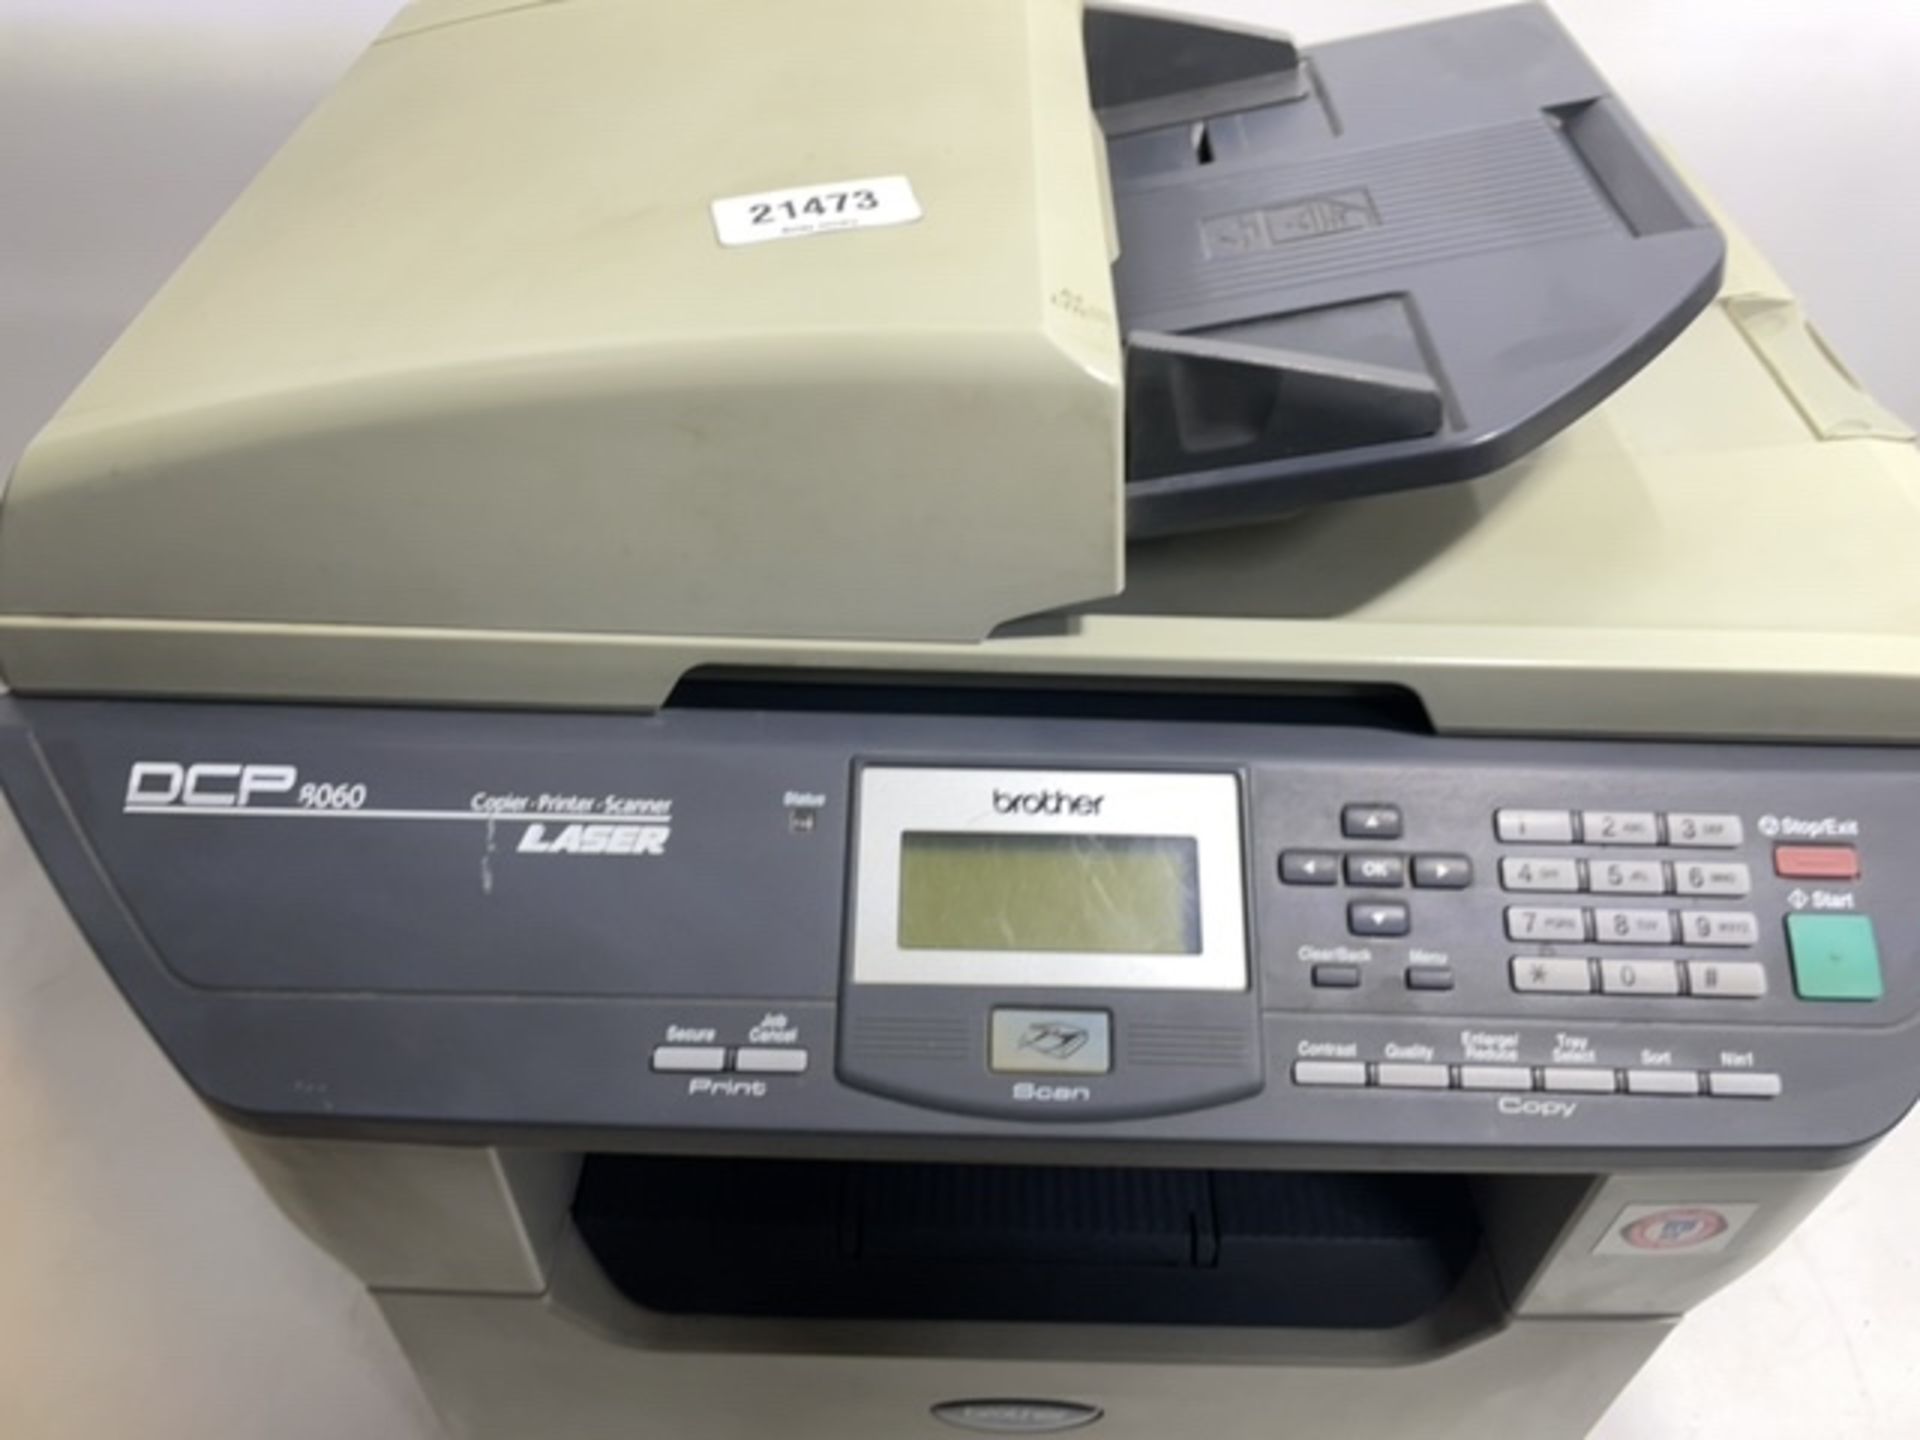 Brother Multifunction Printer | DCP 8060 - Image 2 of 5